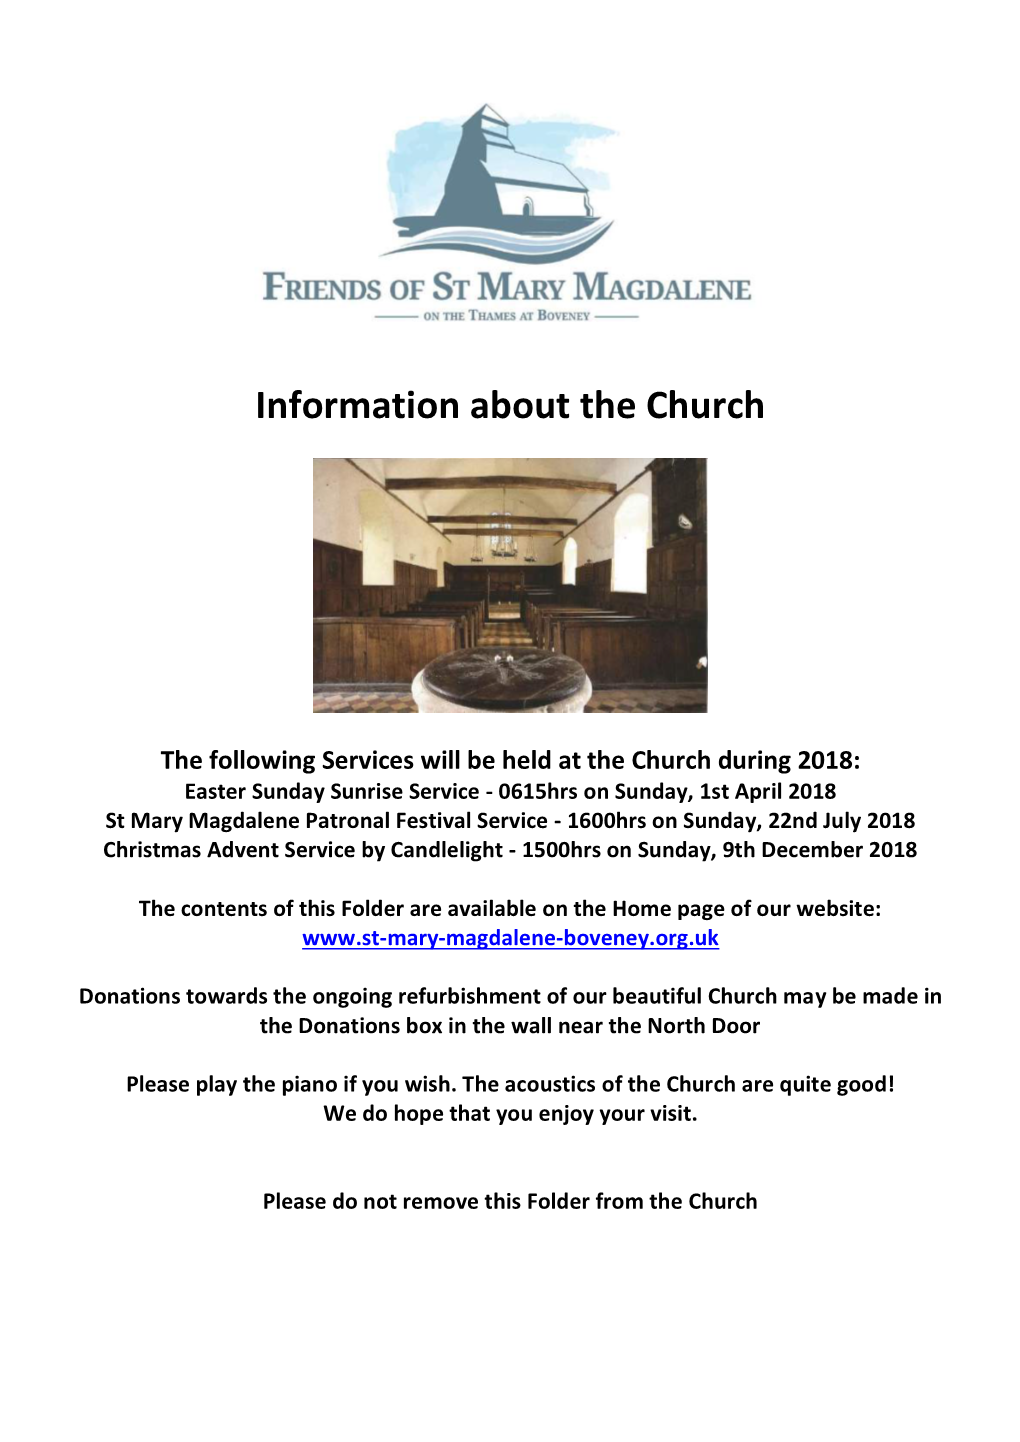 Information About the Church